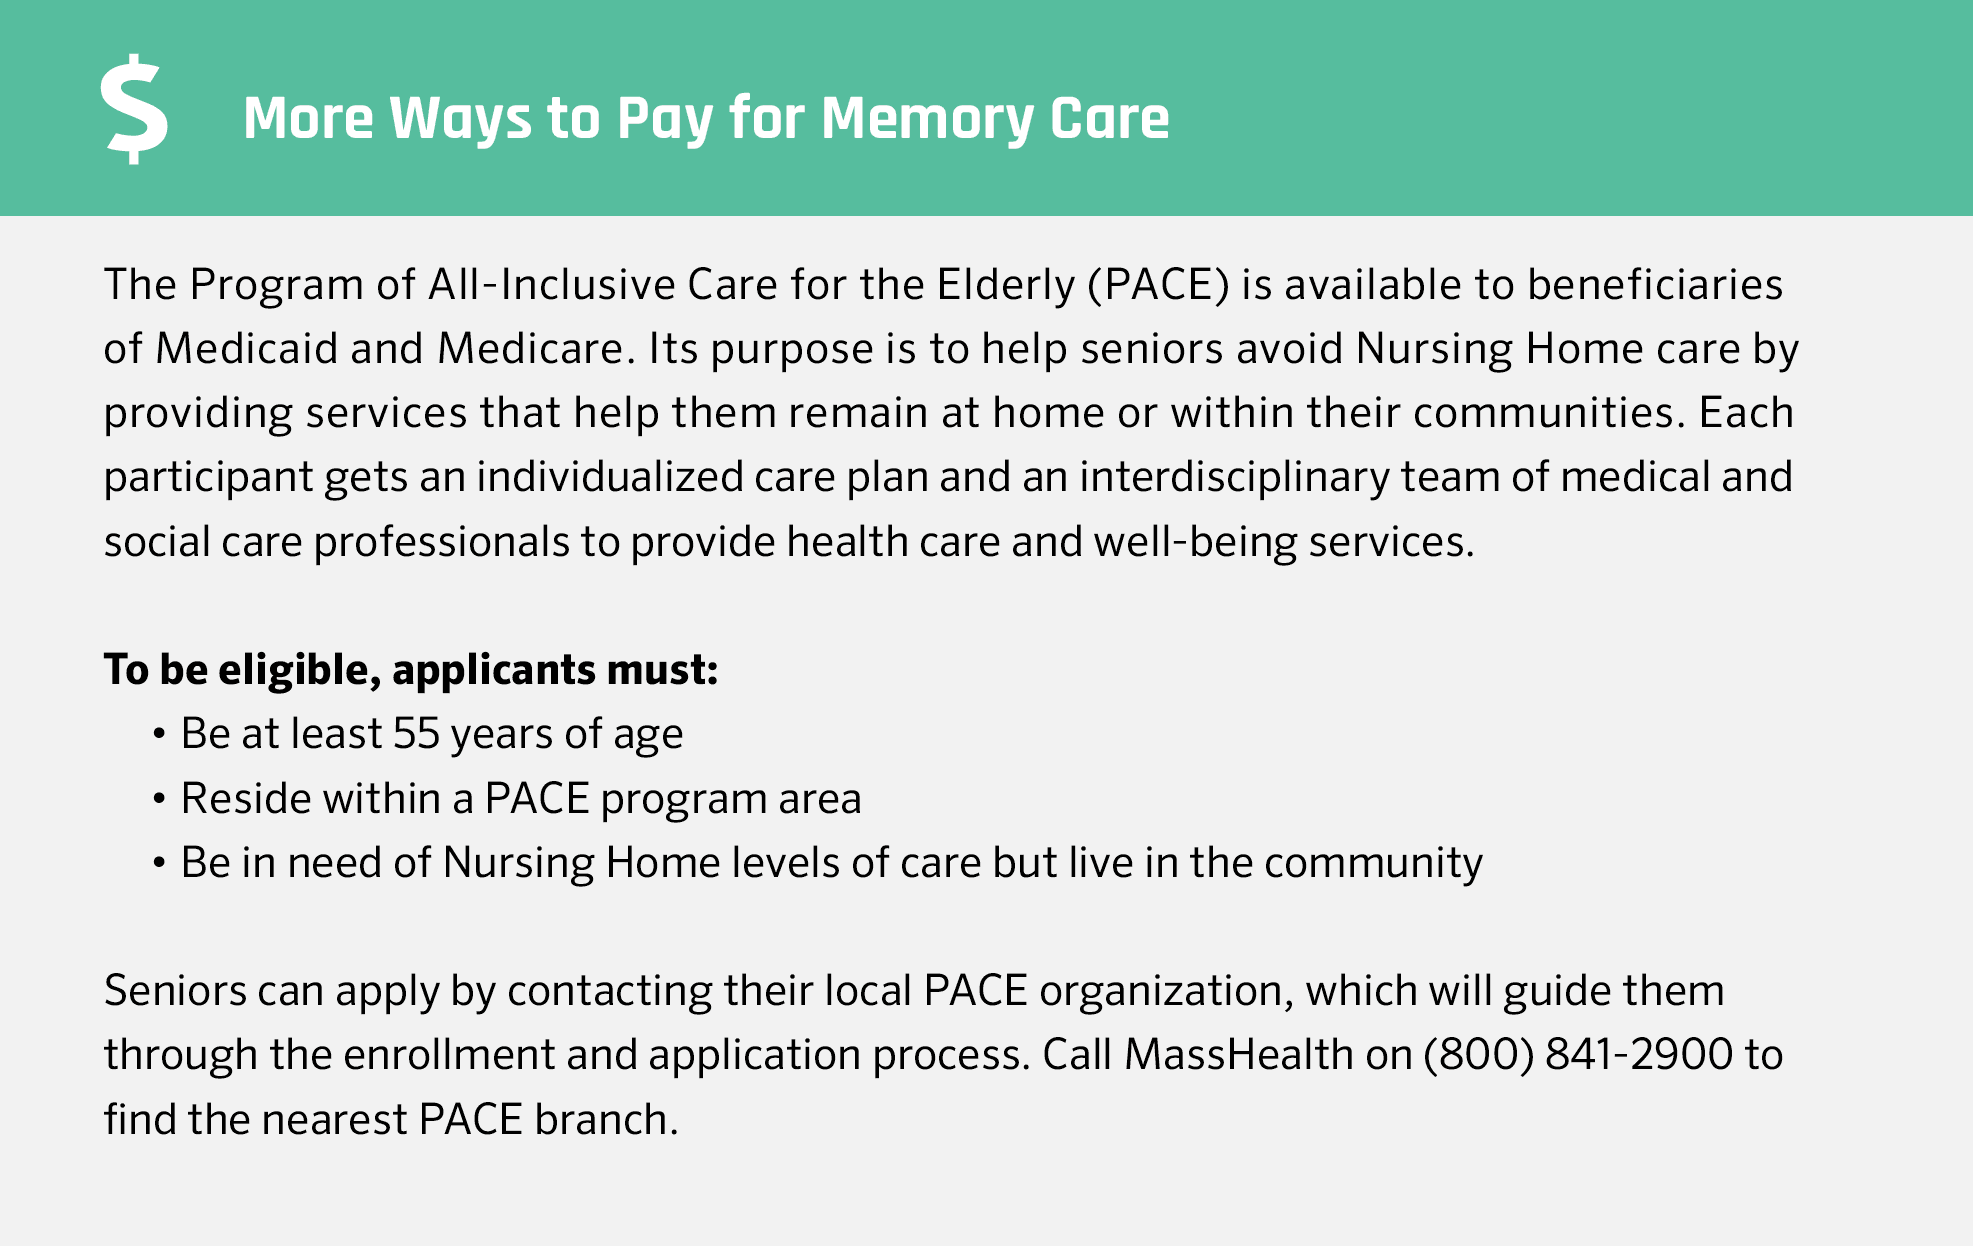 More ways to pay for memory care in Massachusetts